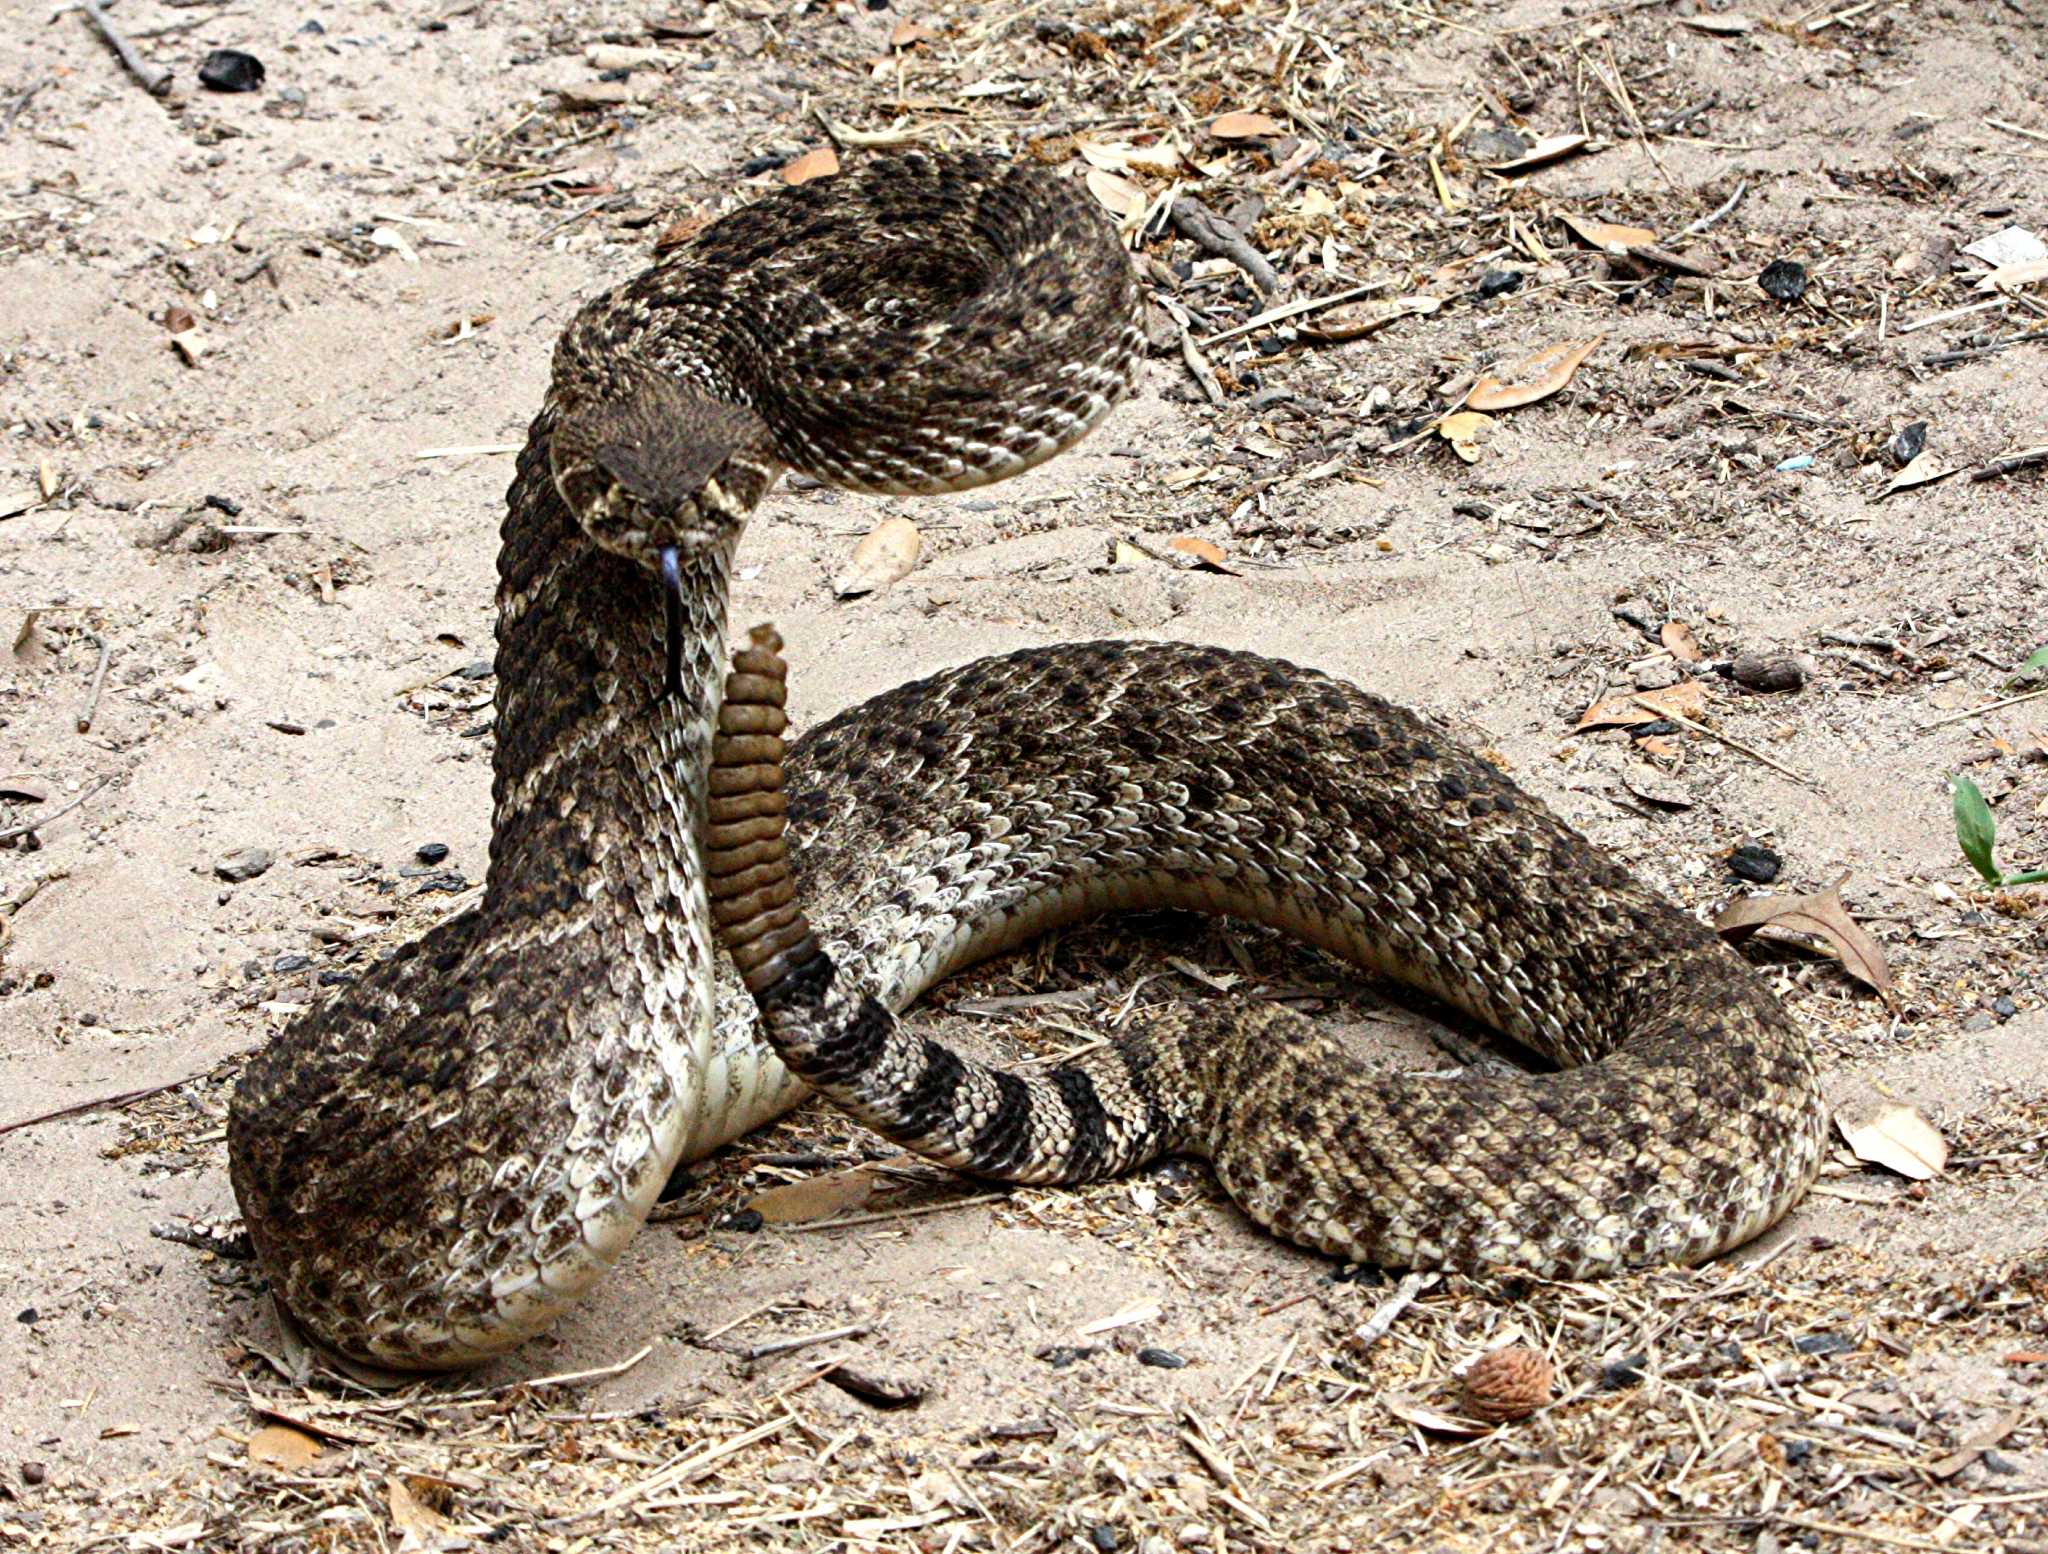 Know what snake gassing is? You can do it in Texas - Houston Chronicle2048 x 1554